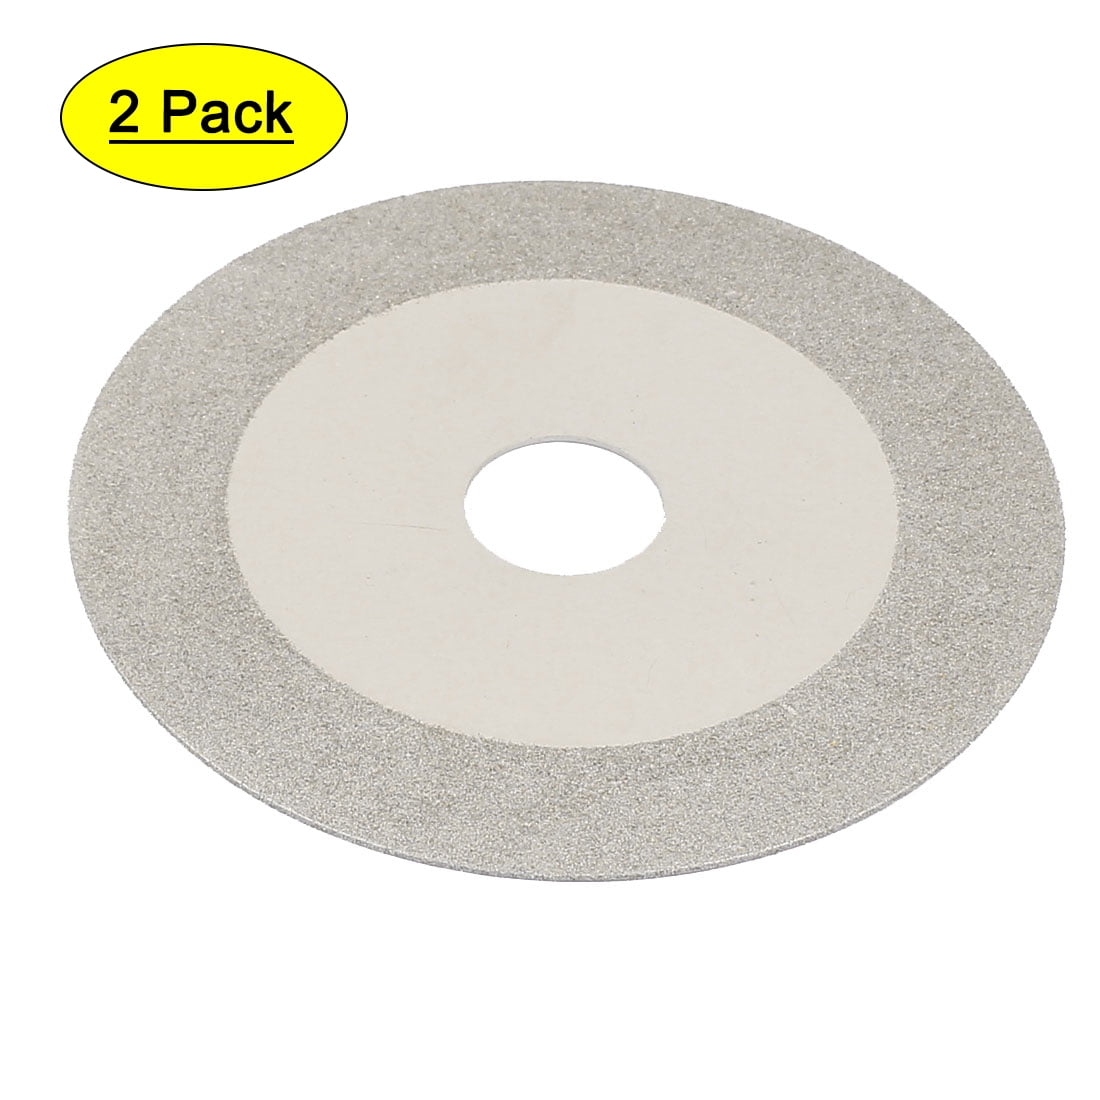 4" Diamond Cutting Wheels  Grinding Disc for Stone 120 Grits Silver Tone 2pcs 